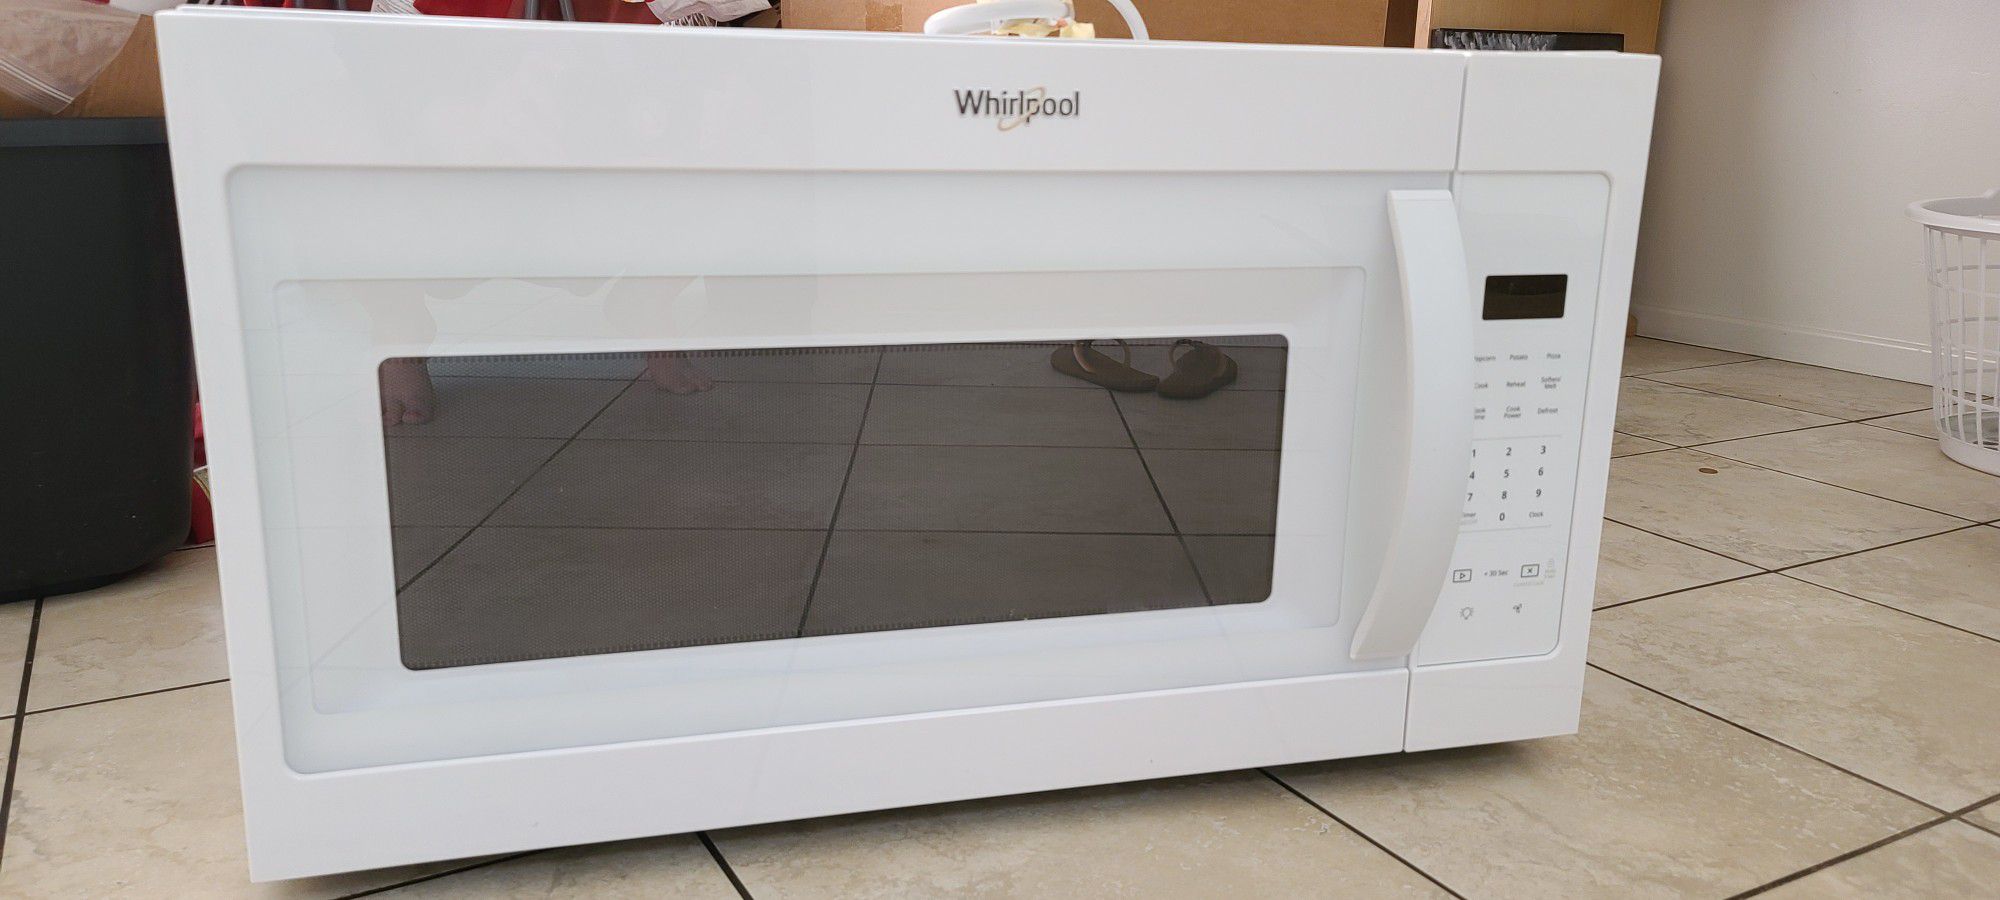 Whirlpool Above Oven Microwave